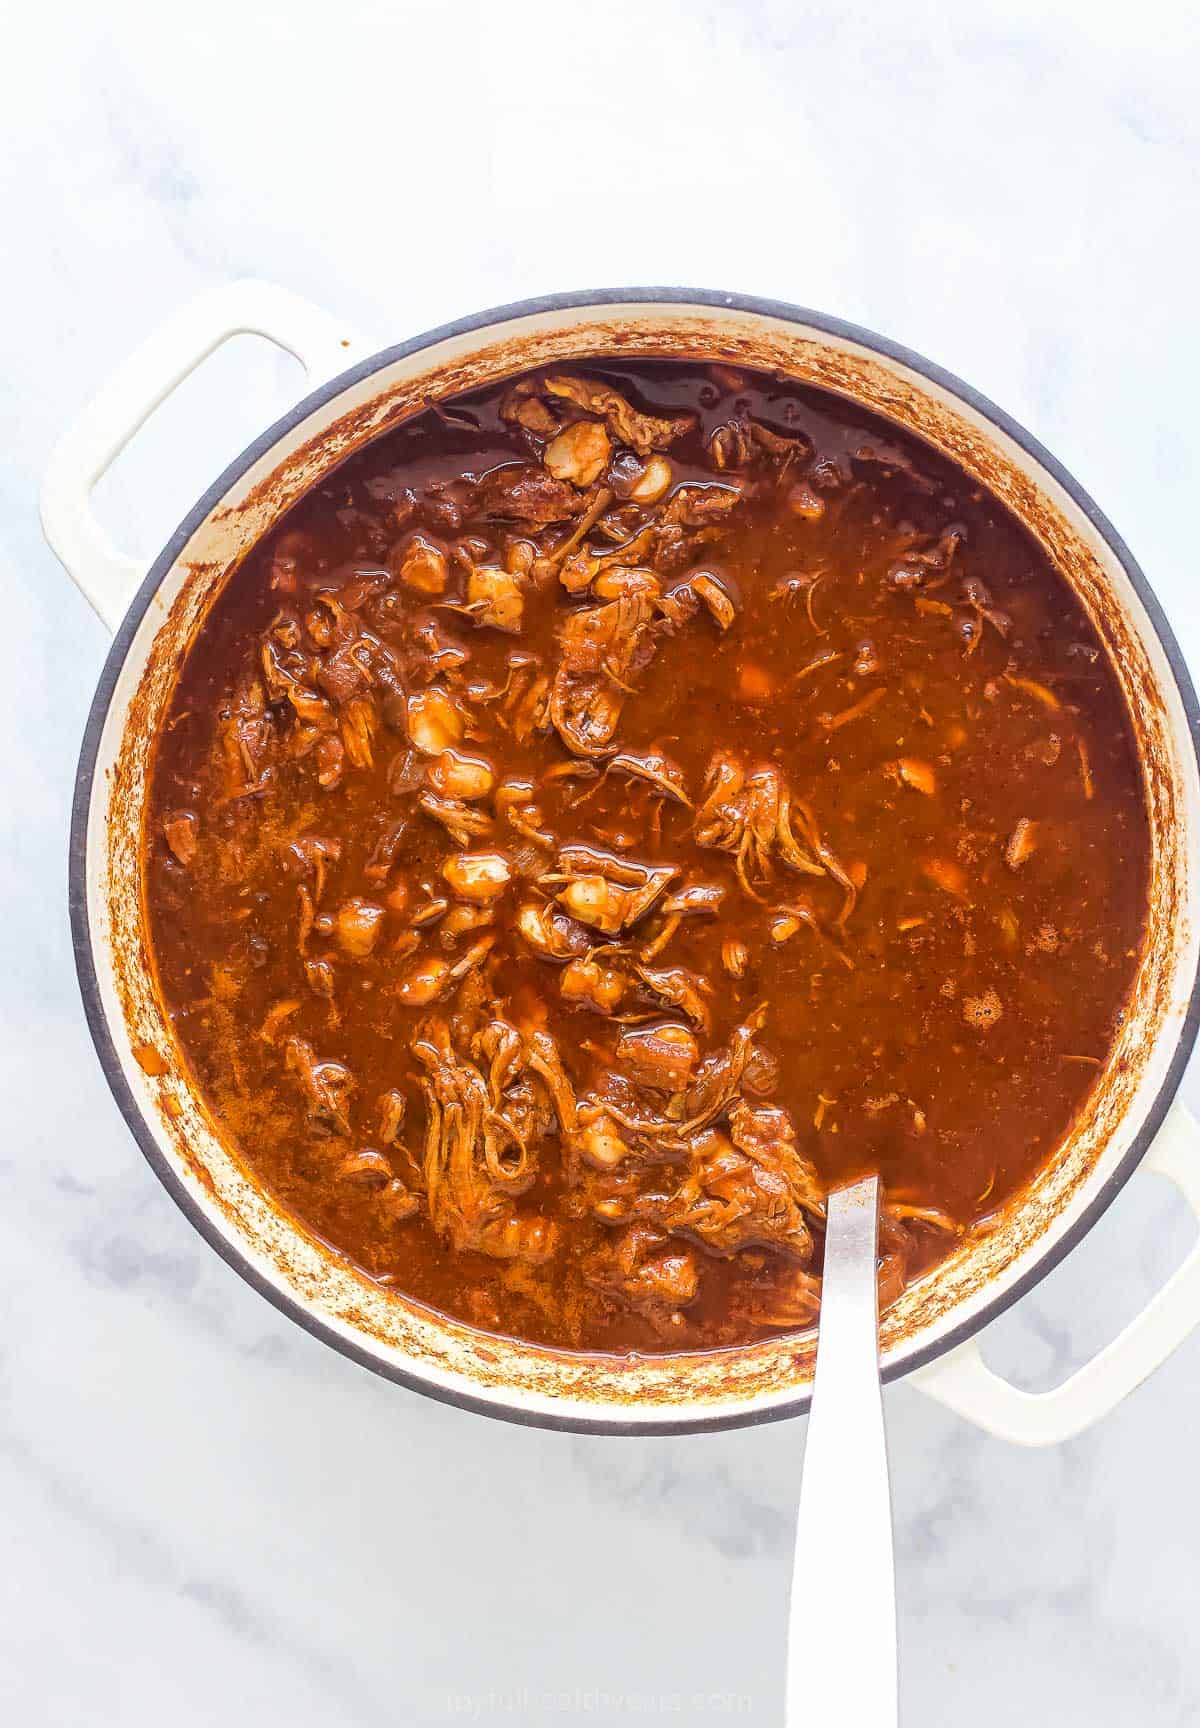 a pot of Mexican Chicken Stew with bits of pulled chicken and hominy in a brown broth